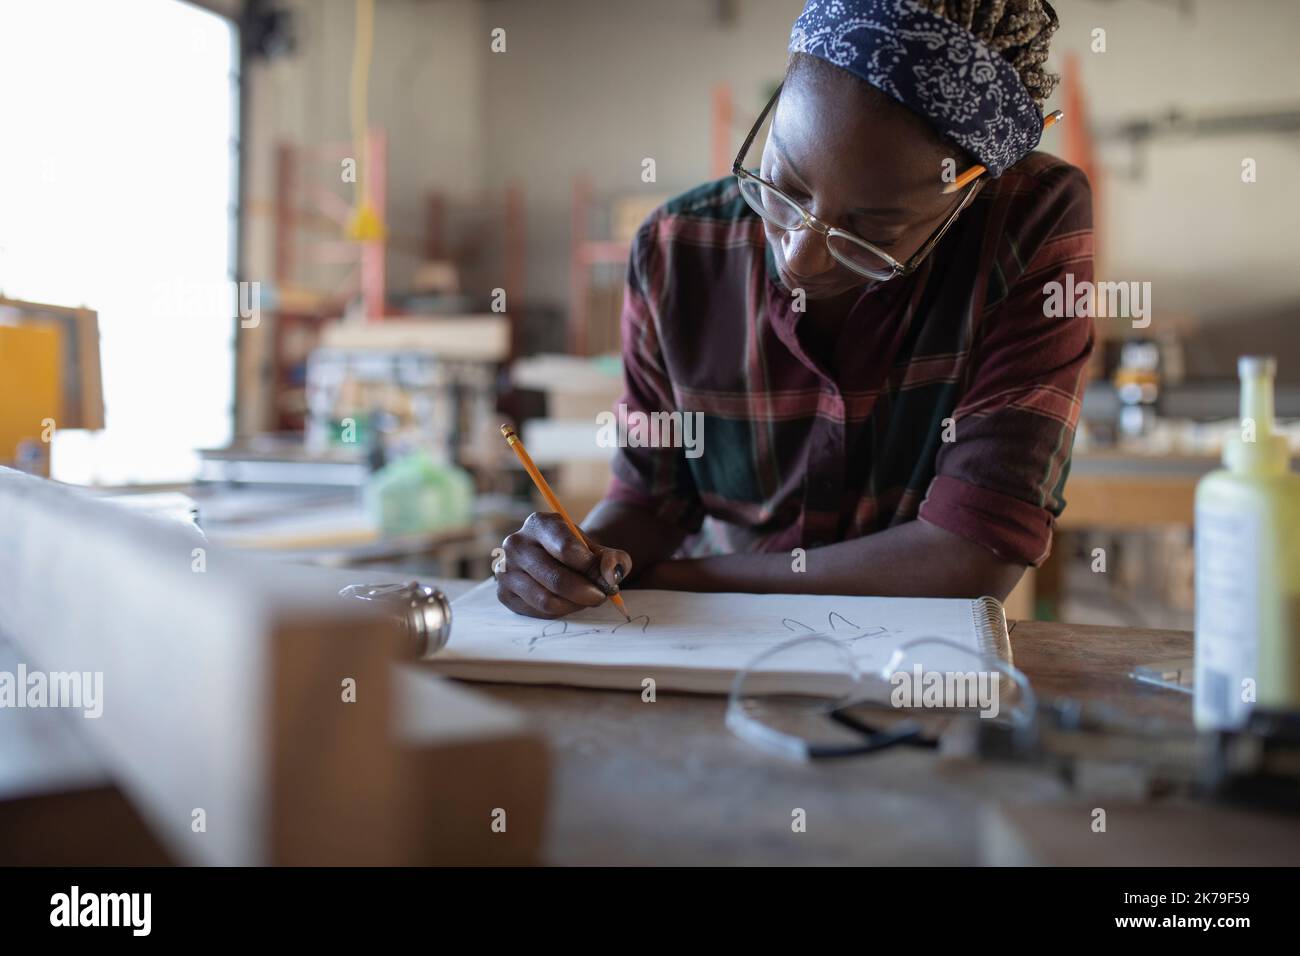 Mid adult woman drawing on work bench in community workshop Stock Photo